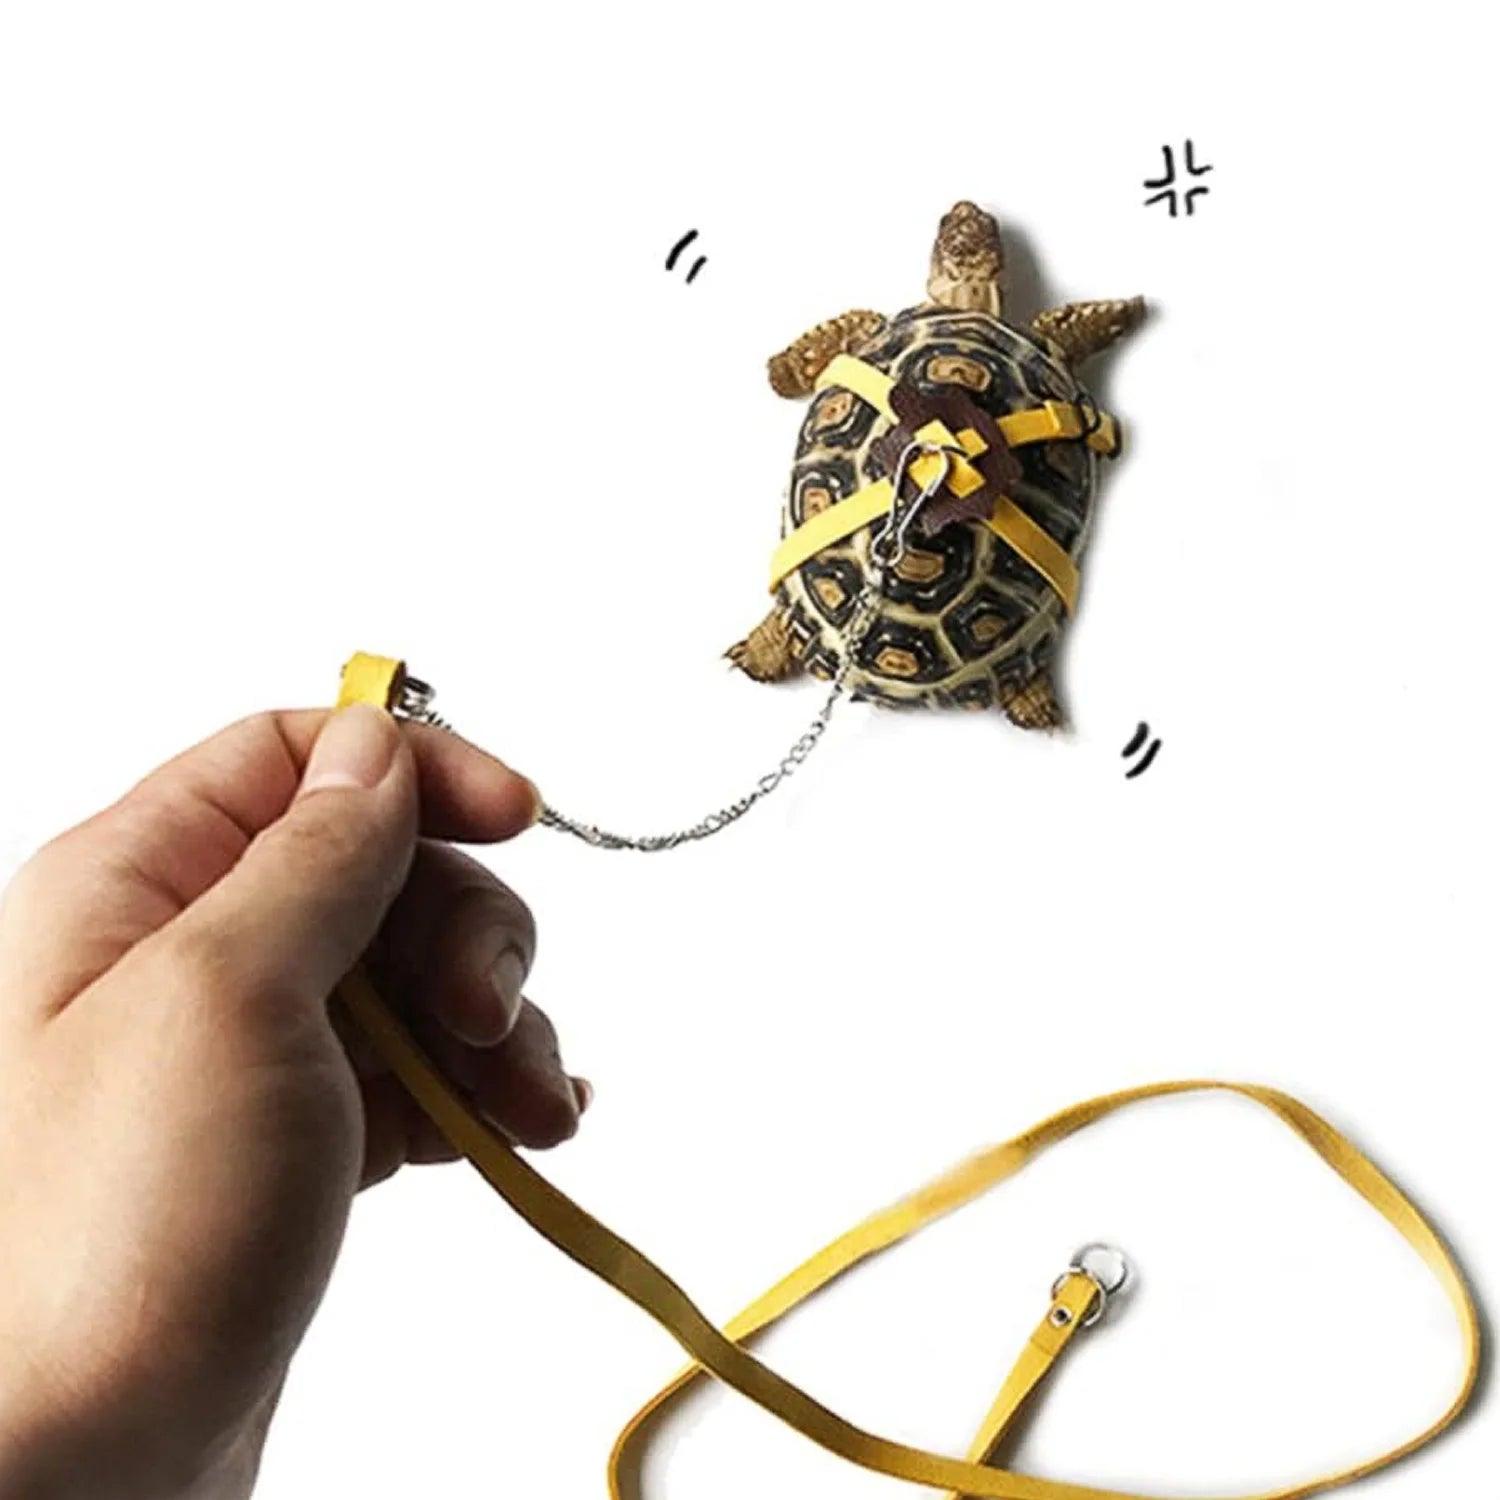 Pet Tortoise Turtle Leather Harness Strap Adjustable Turtle Lizard Strap Collar Walking Leash Control Rope - Ammpoure Wellbeing